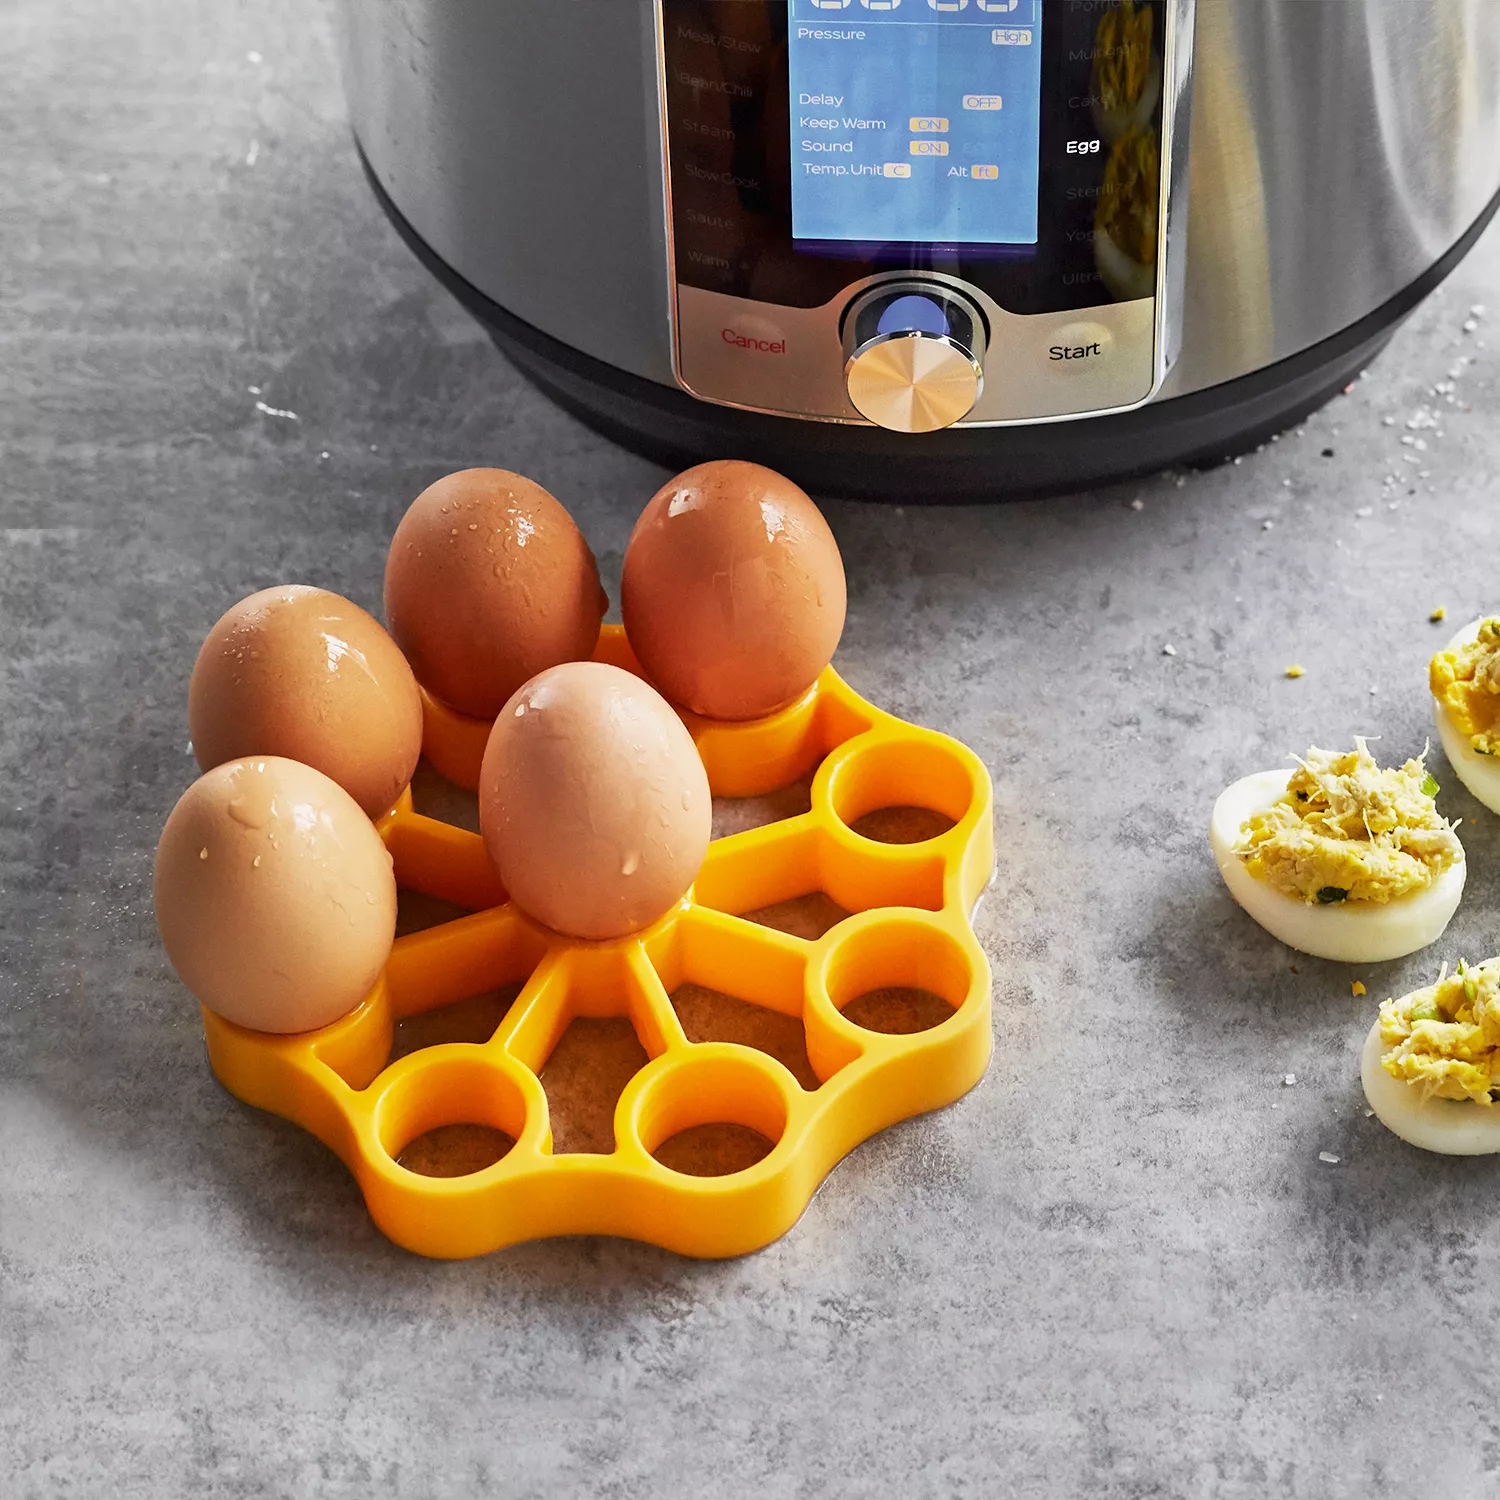 Instant Pot Silicone Egg Rack (1 ct)